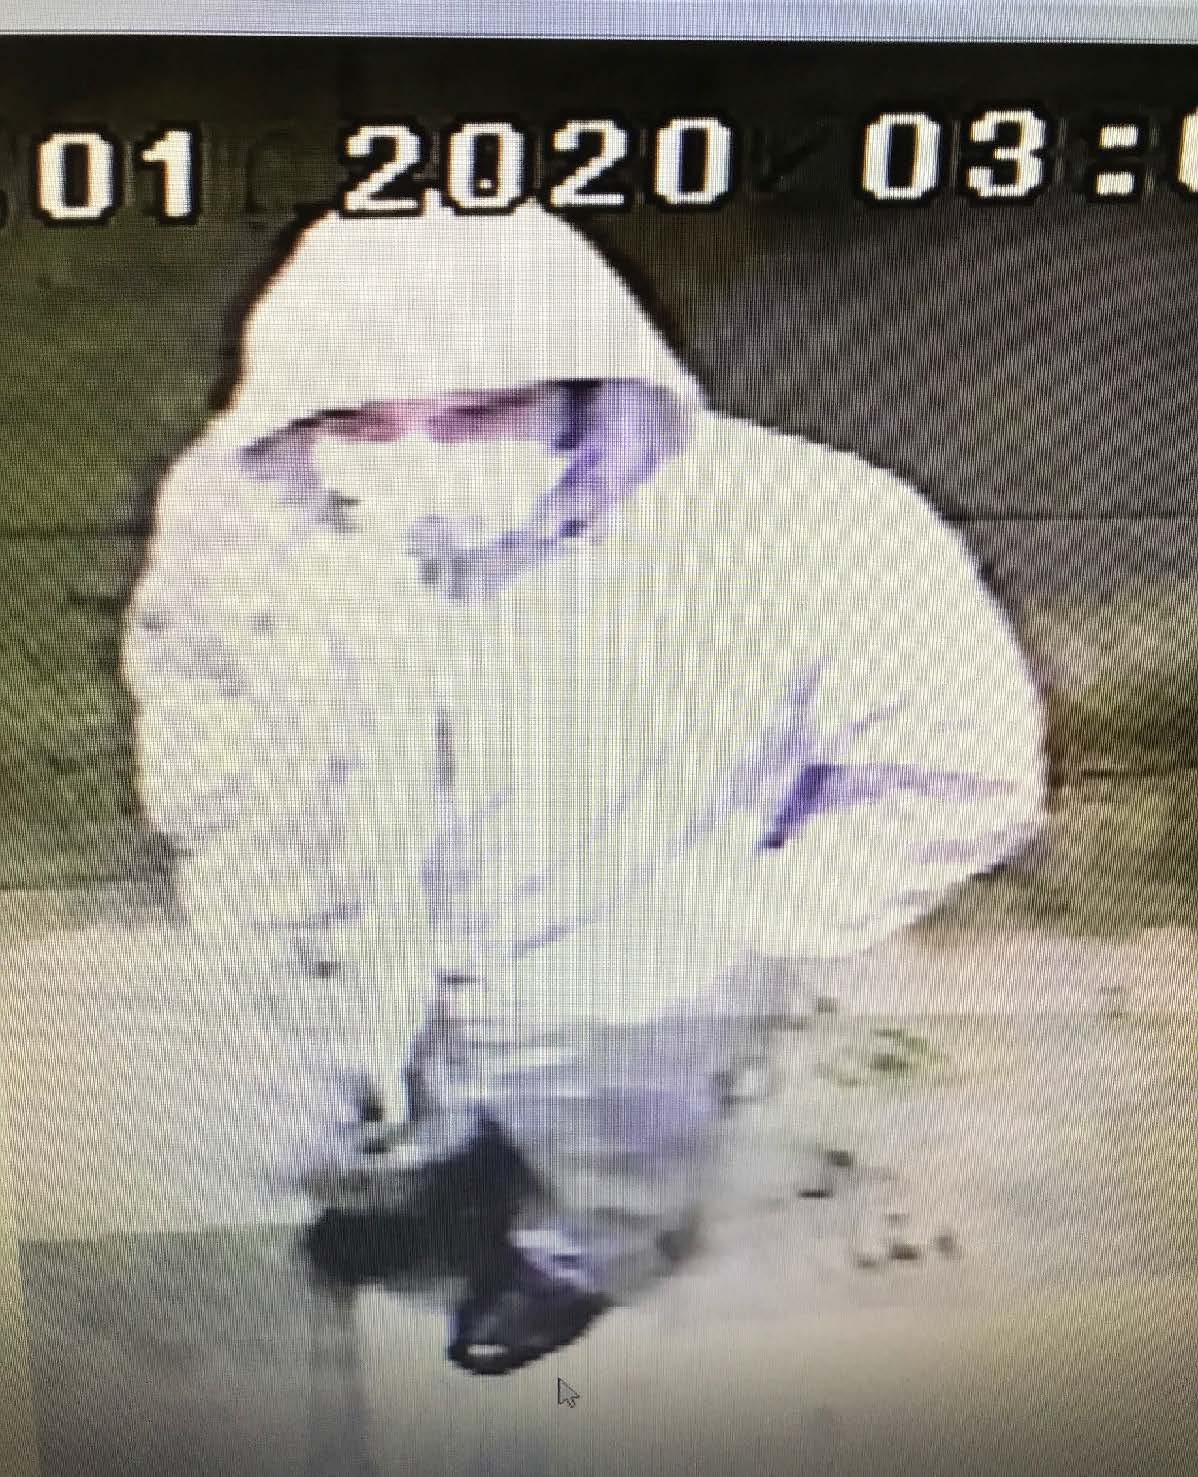 Burglary suspect wearing a hoodie and face mask